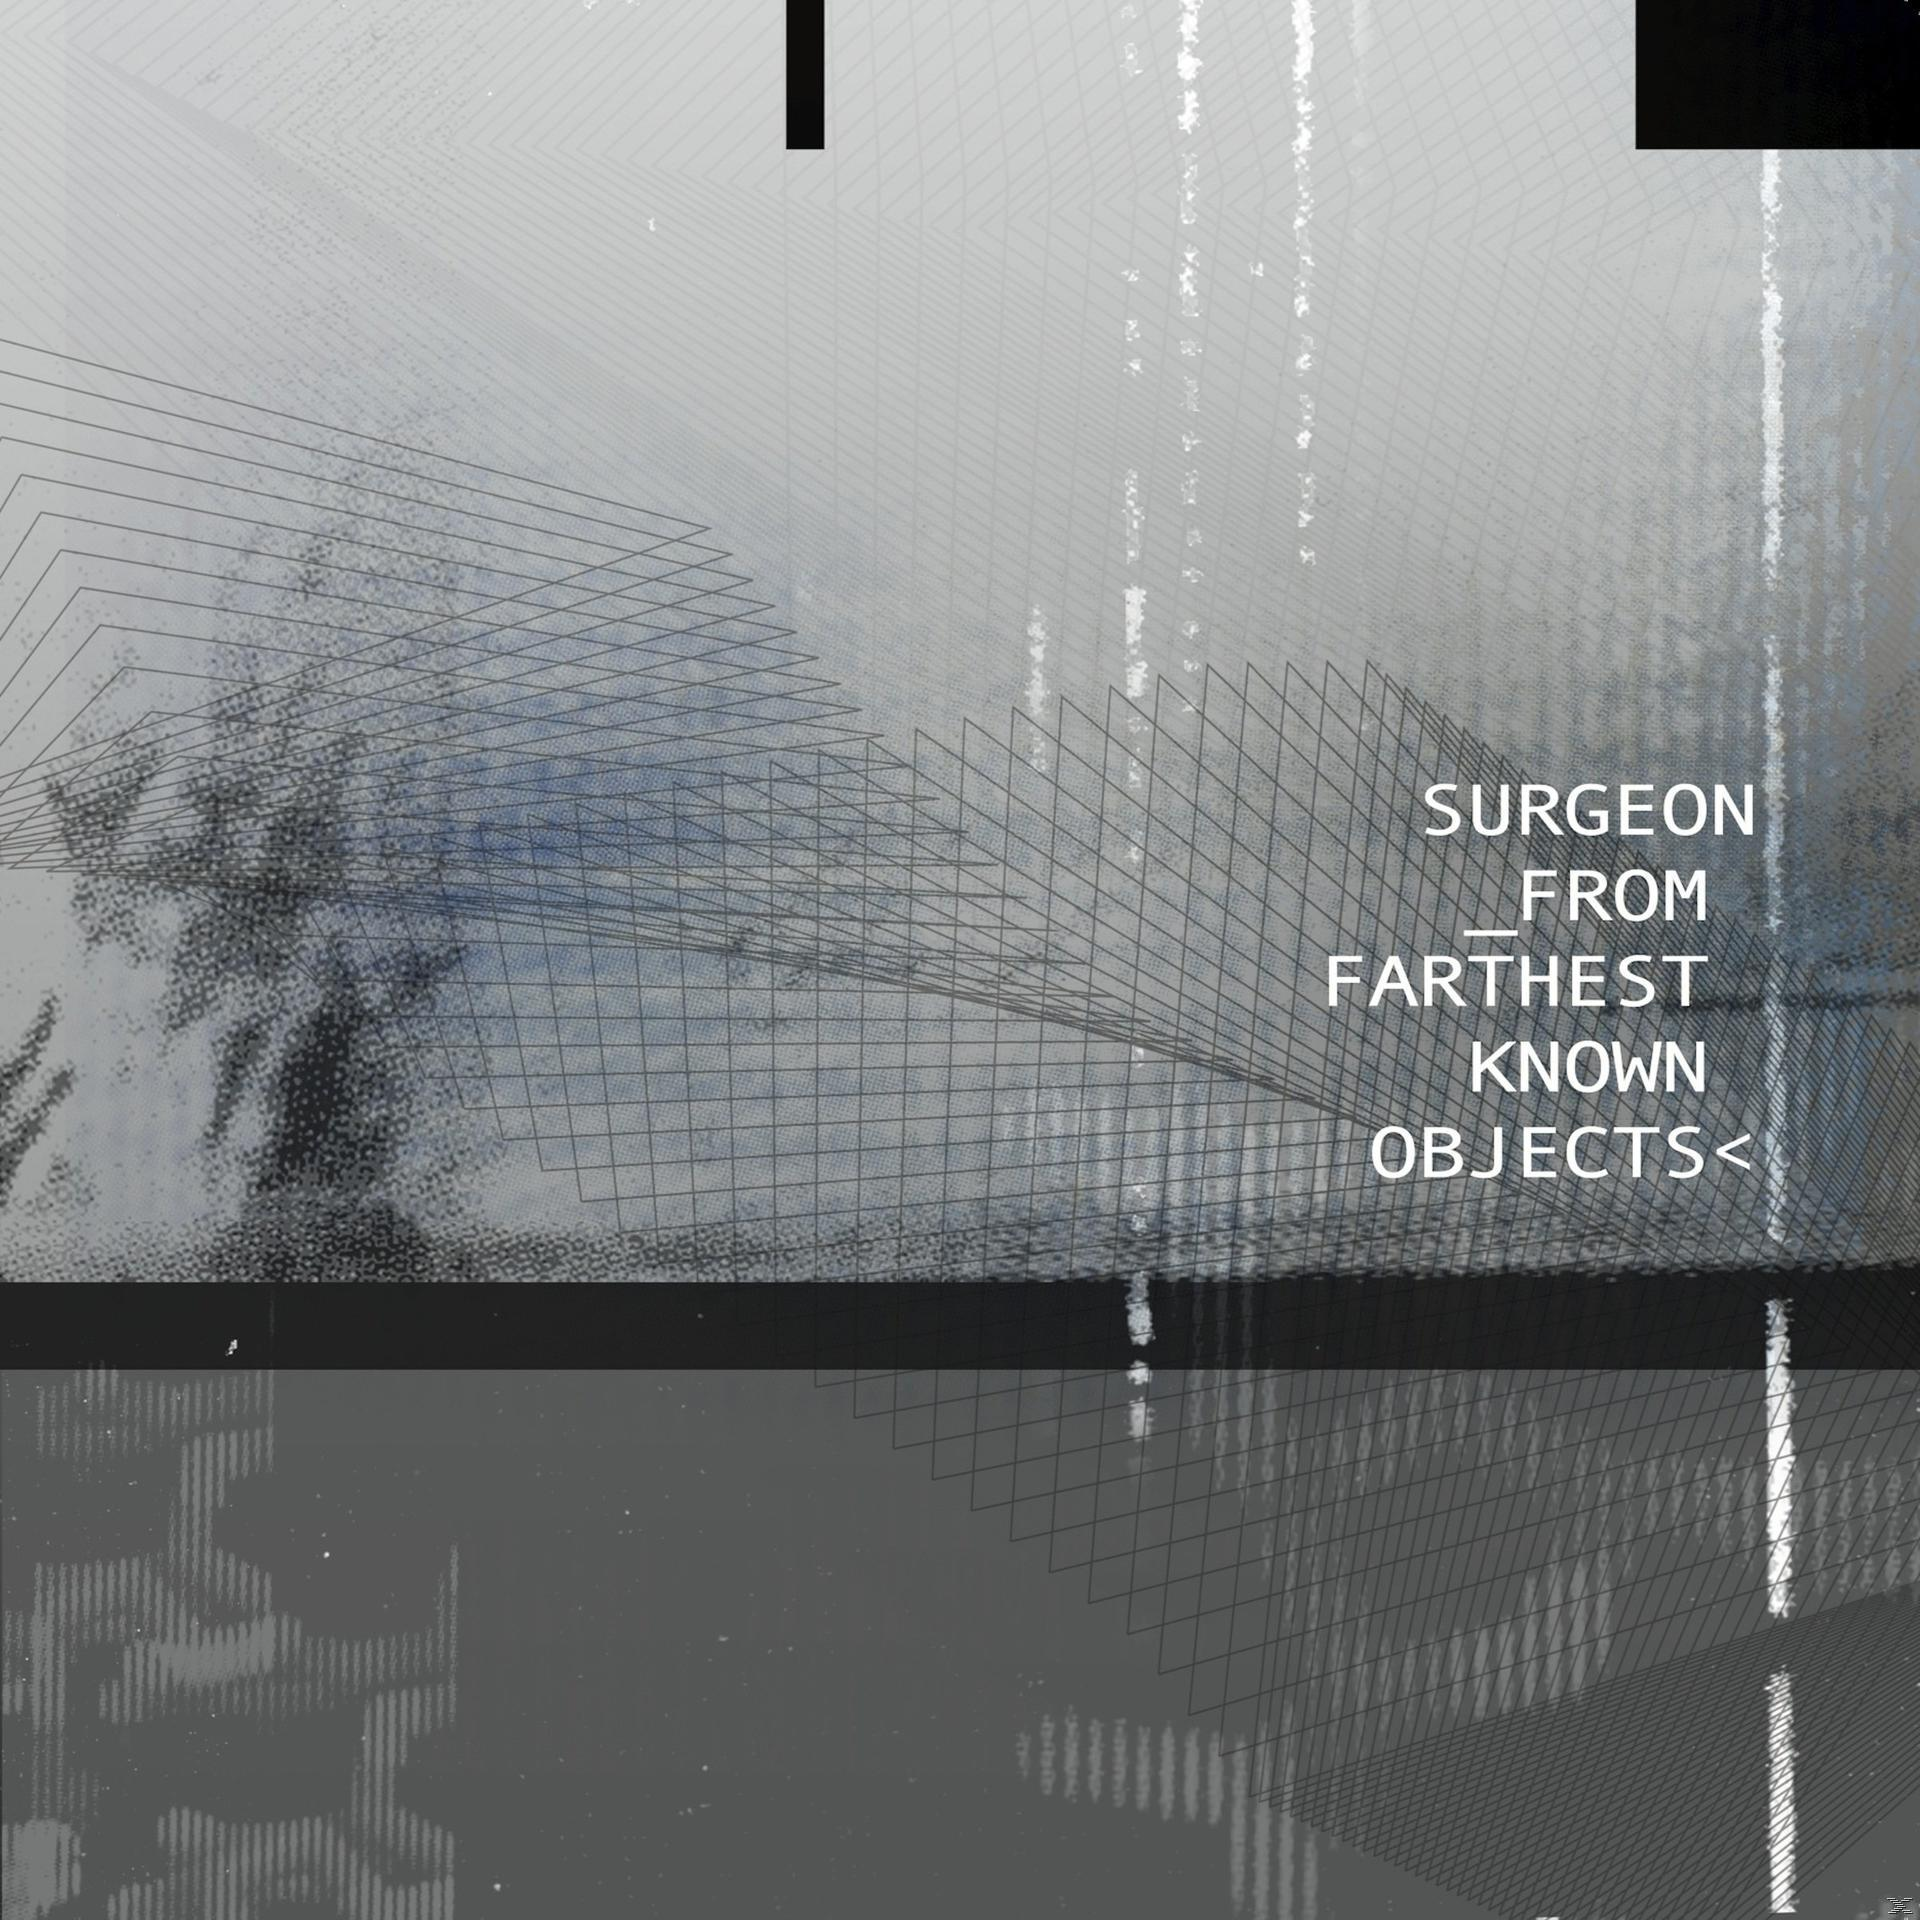 (CD) From Objects - Surgeon Known Farthest -